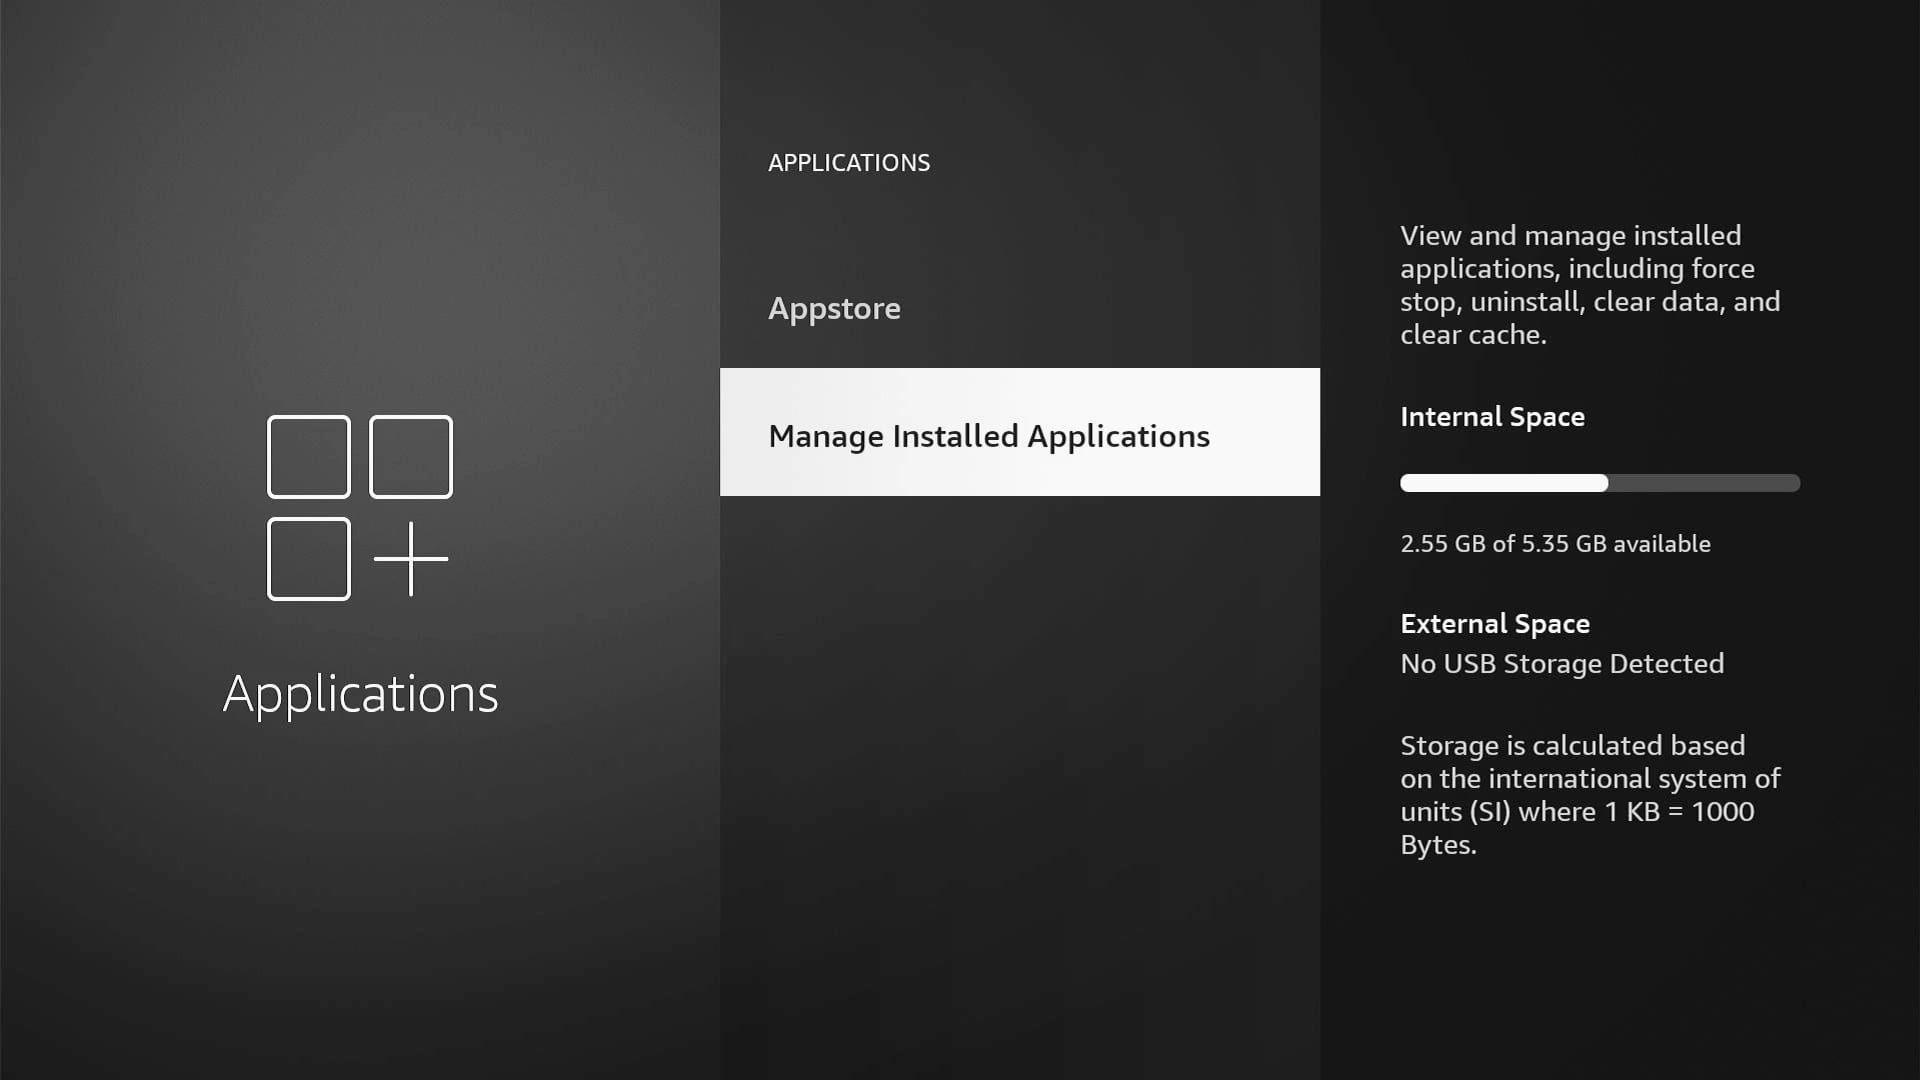 Managing the installed applications on Fire TV